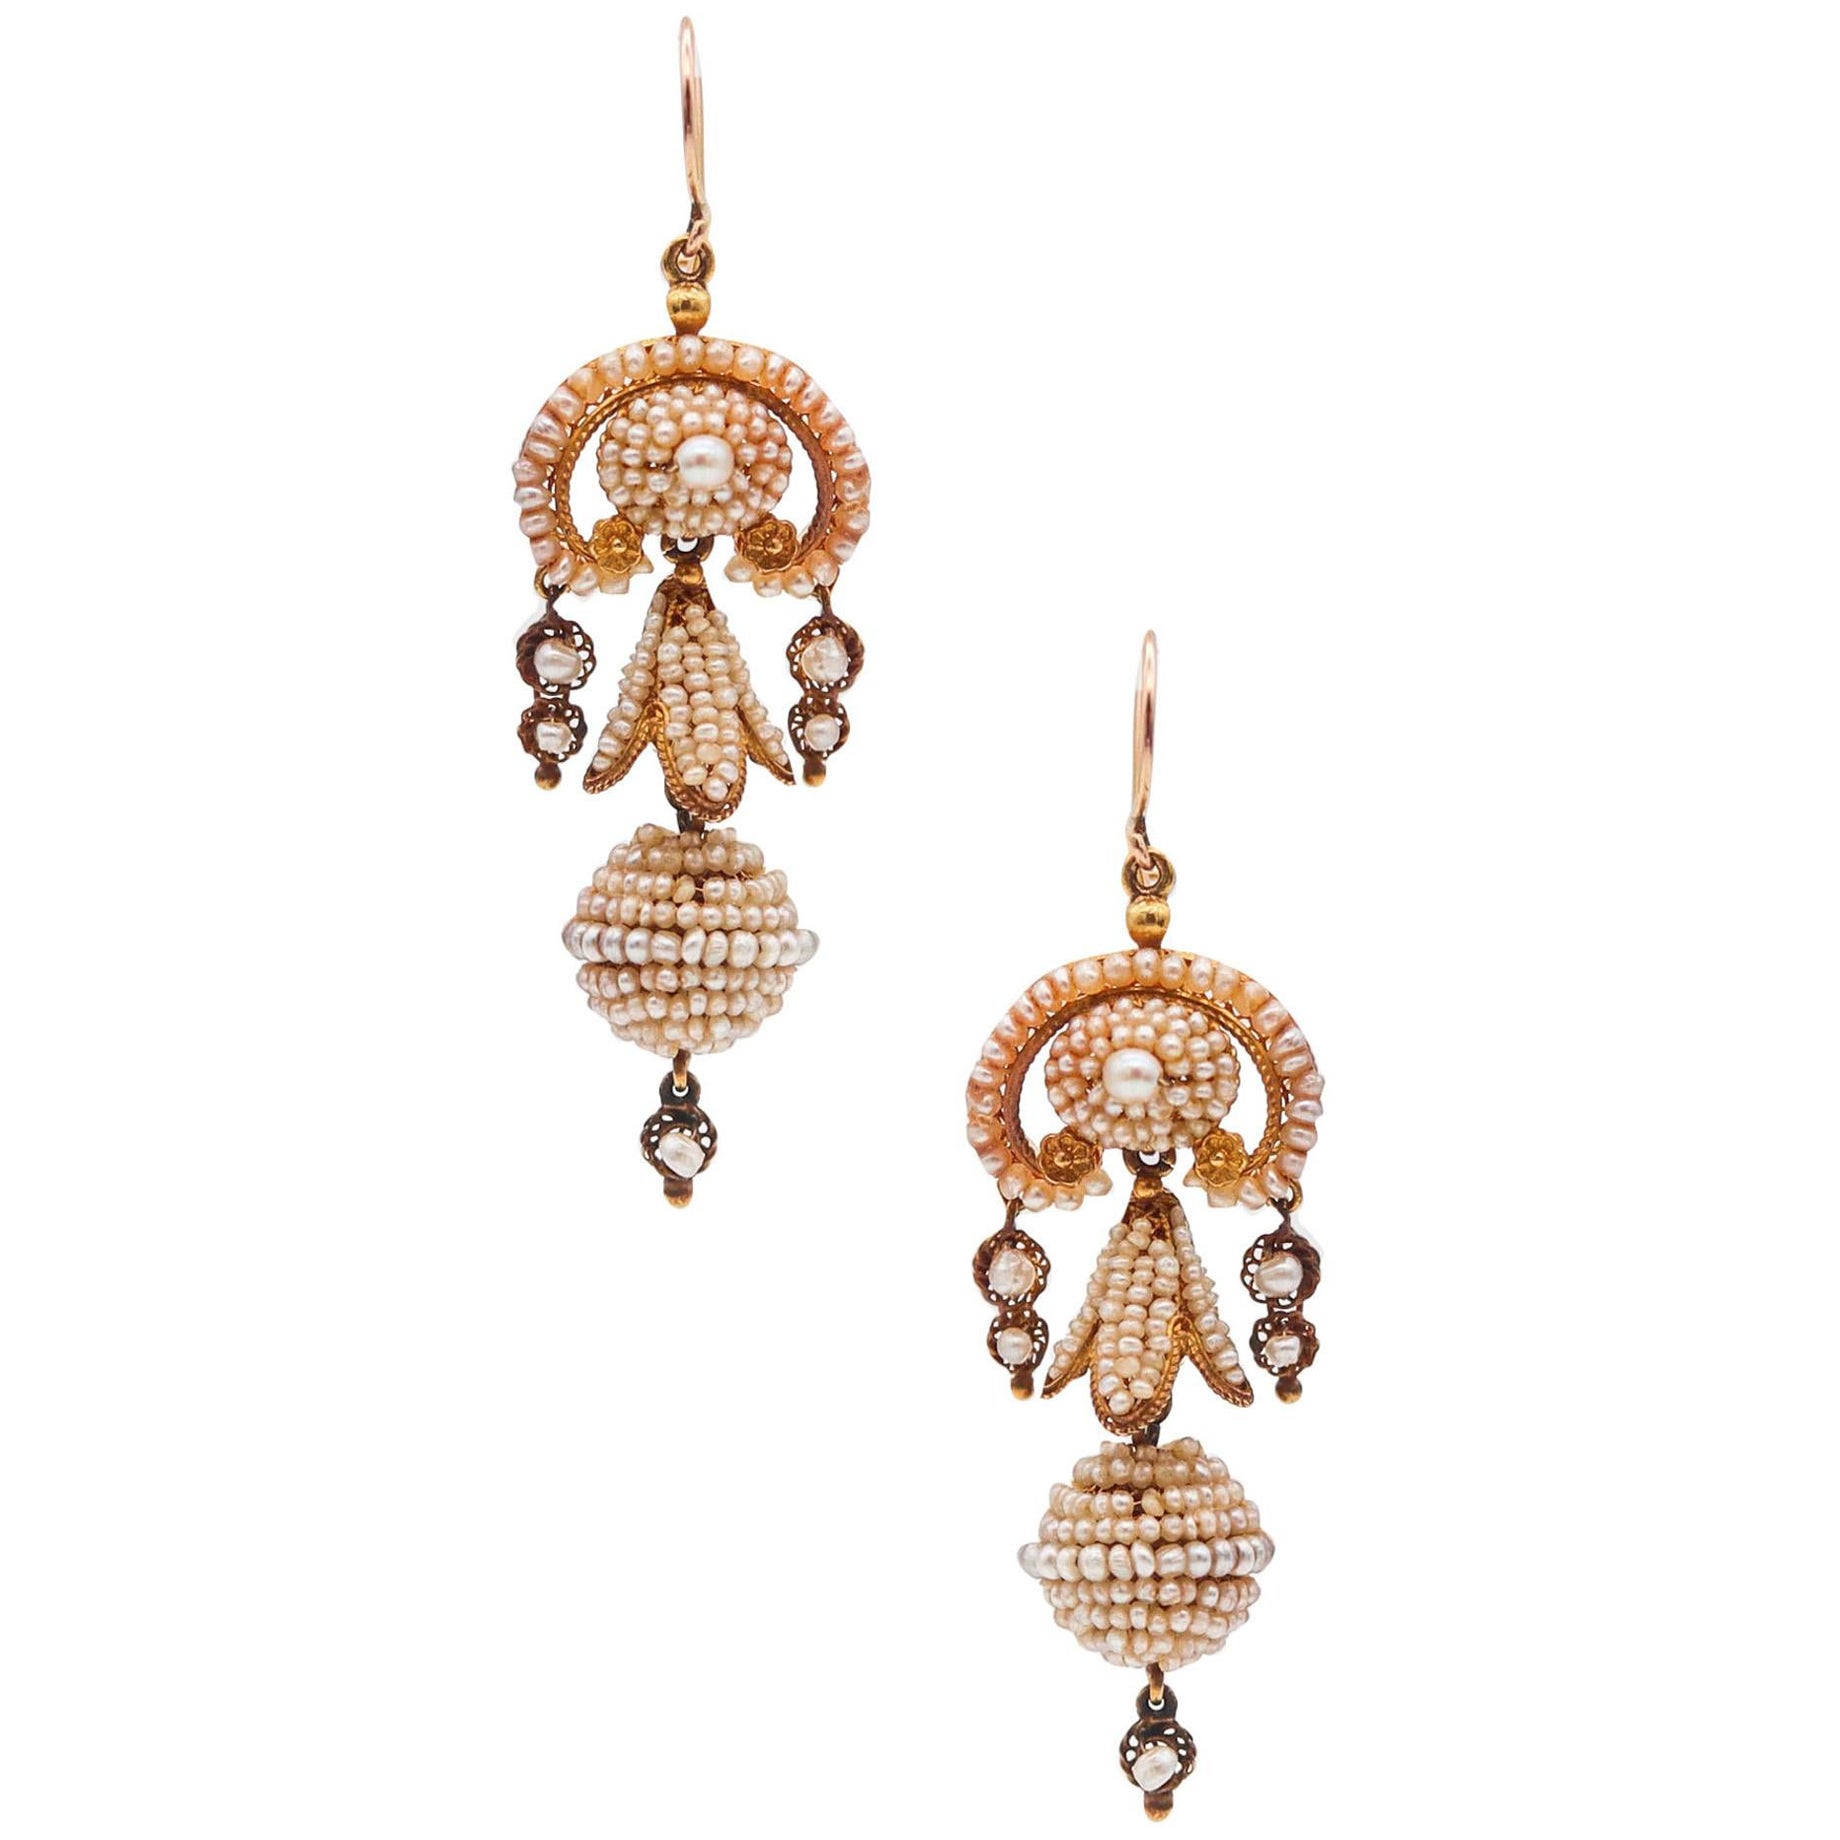 Portuguese Iberian 1850 Dangle Drop Filigree Earrings 21Kt Gold With Seed Pearls For Sale